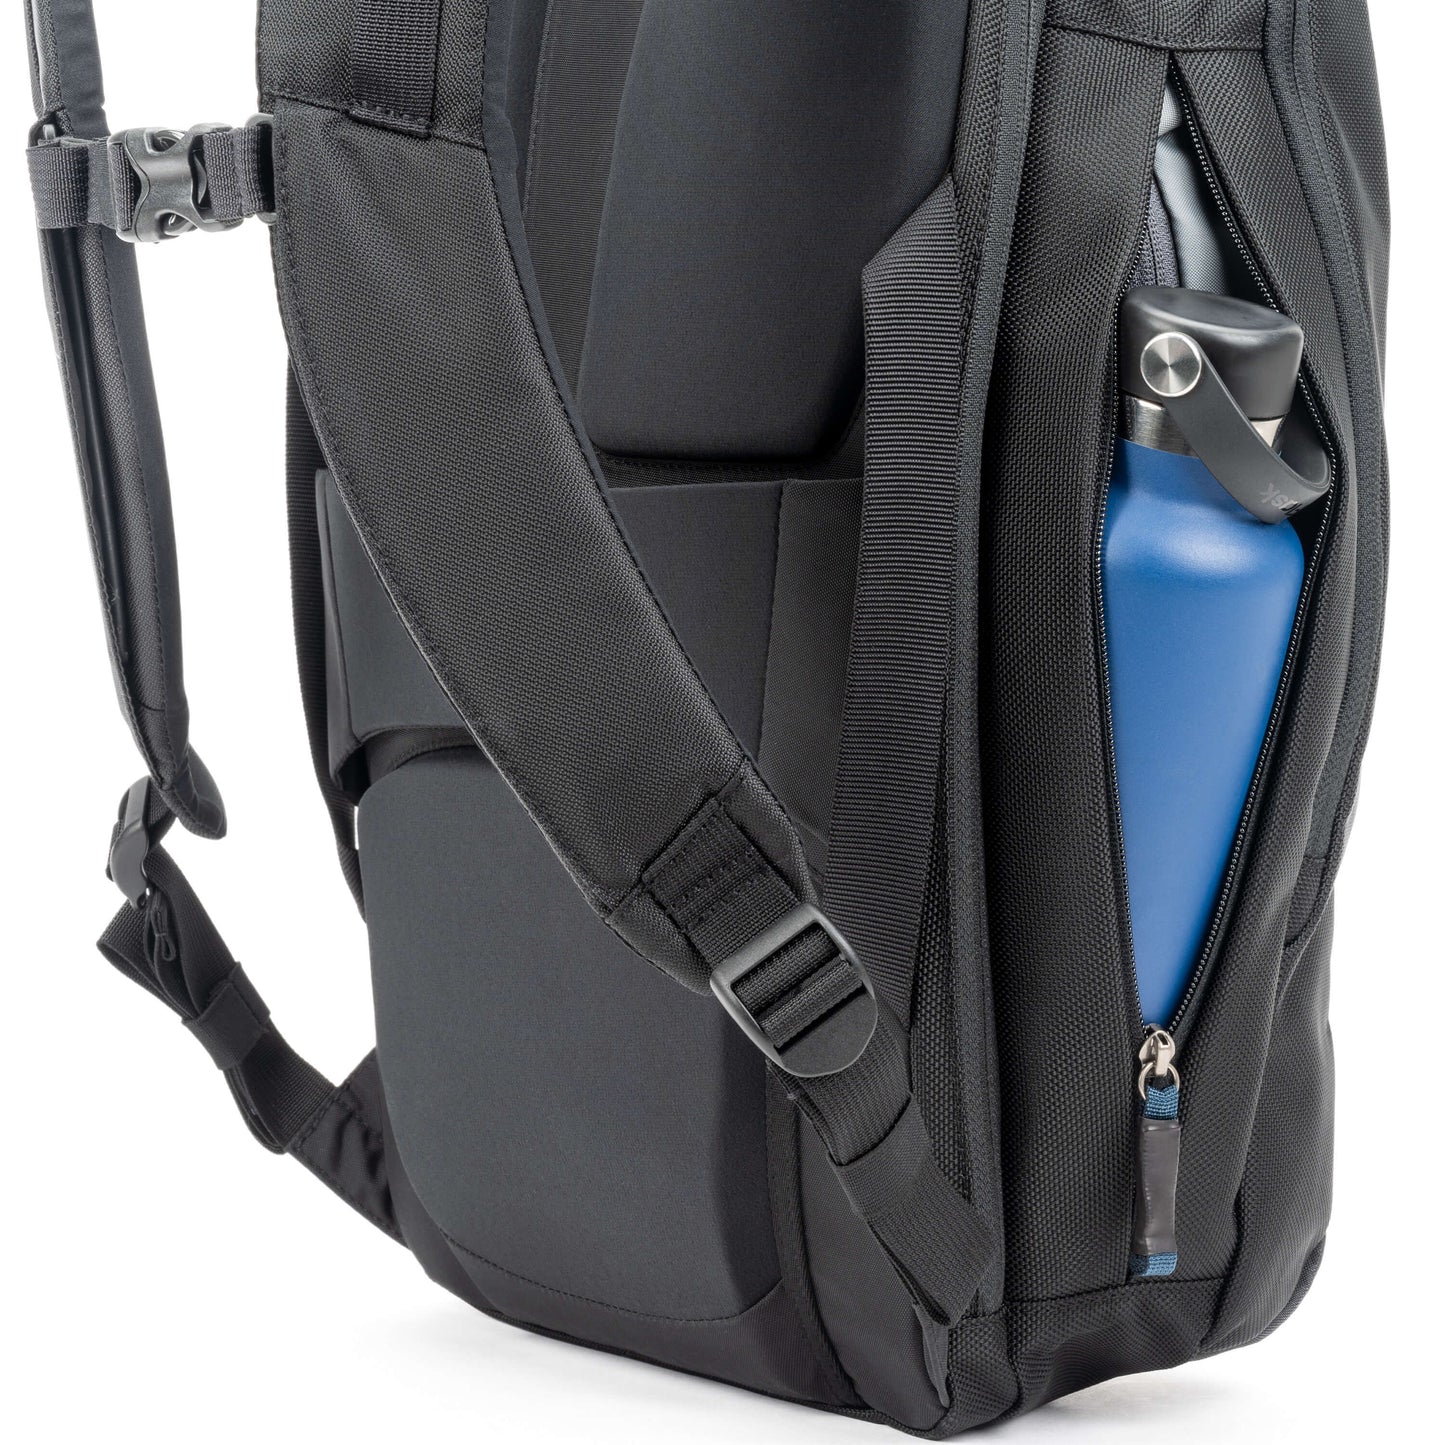 
                  
                    Two discreet exterior pockets for water bottles umbrellas, electronics, gloves, or anything that needs immediate access from the outside of the pack
                  
                